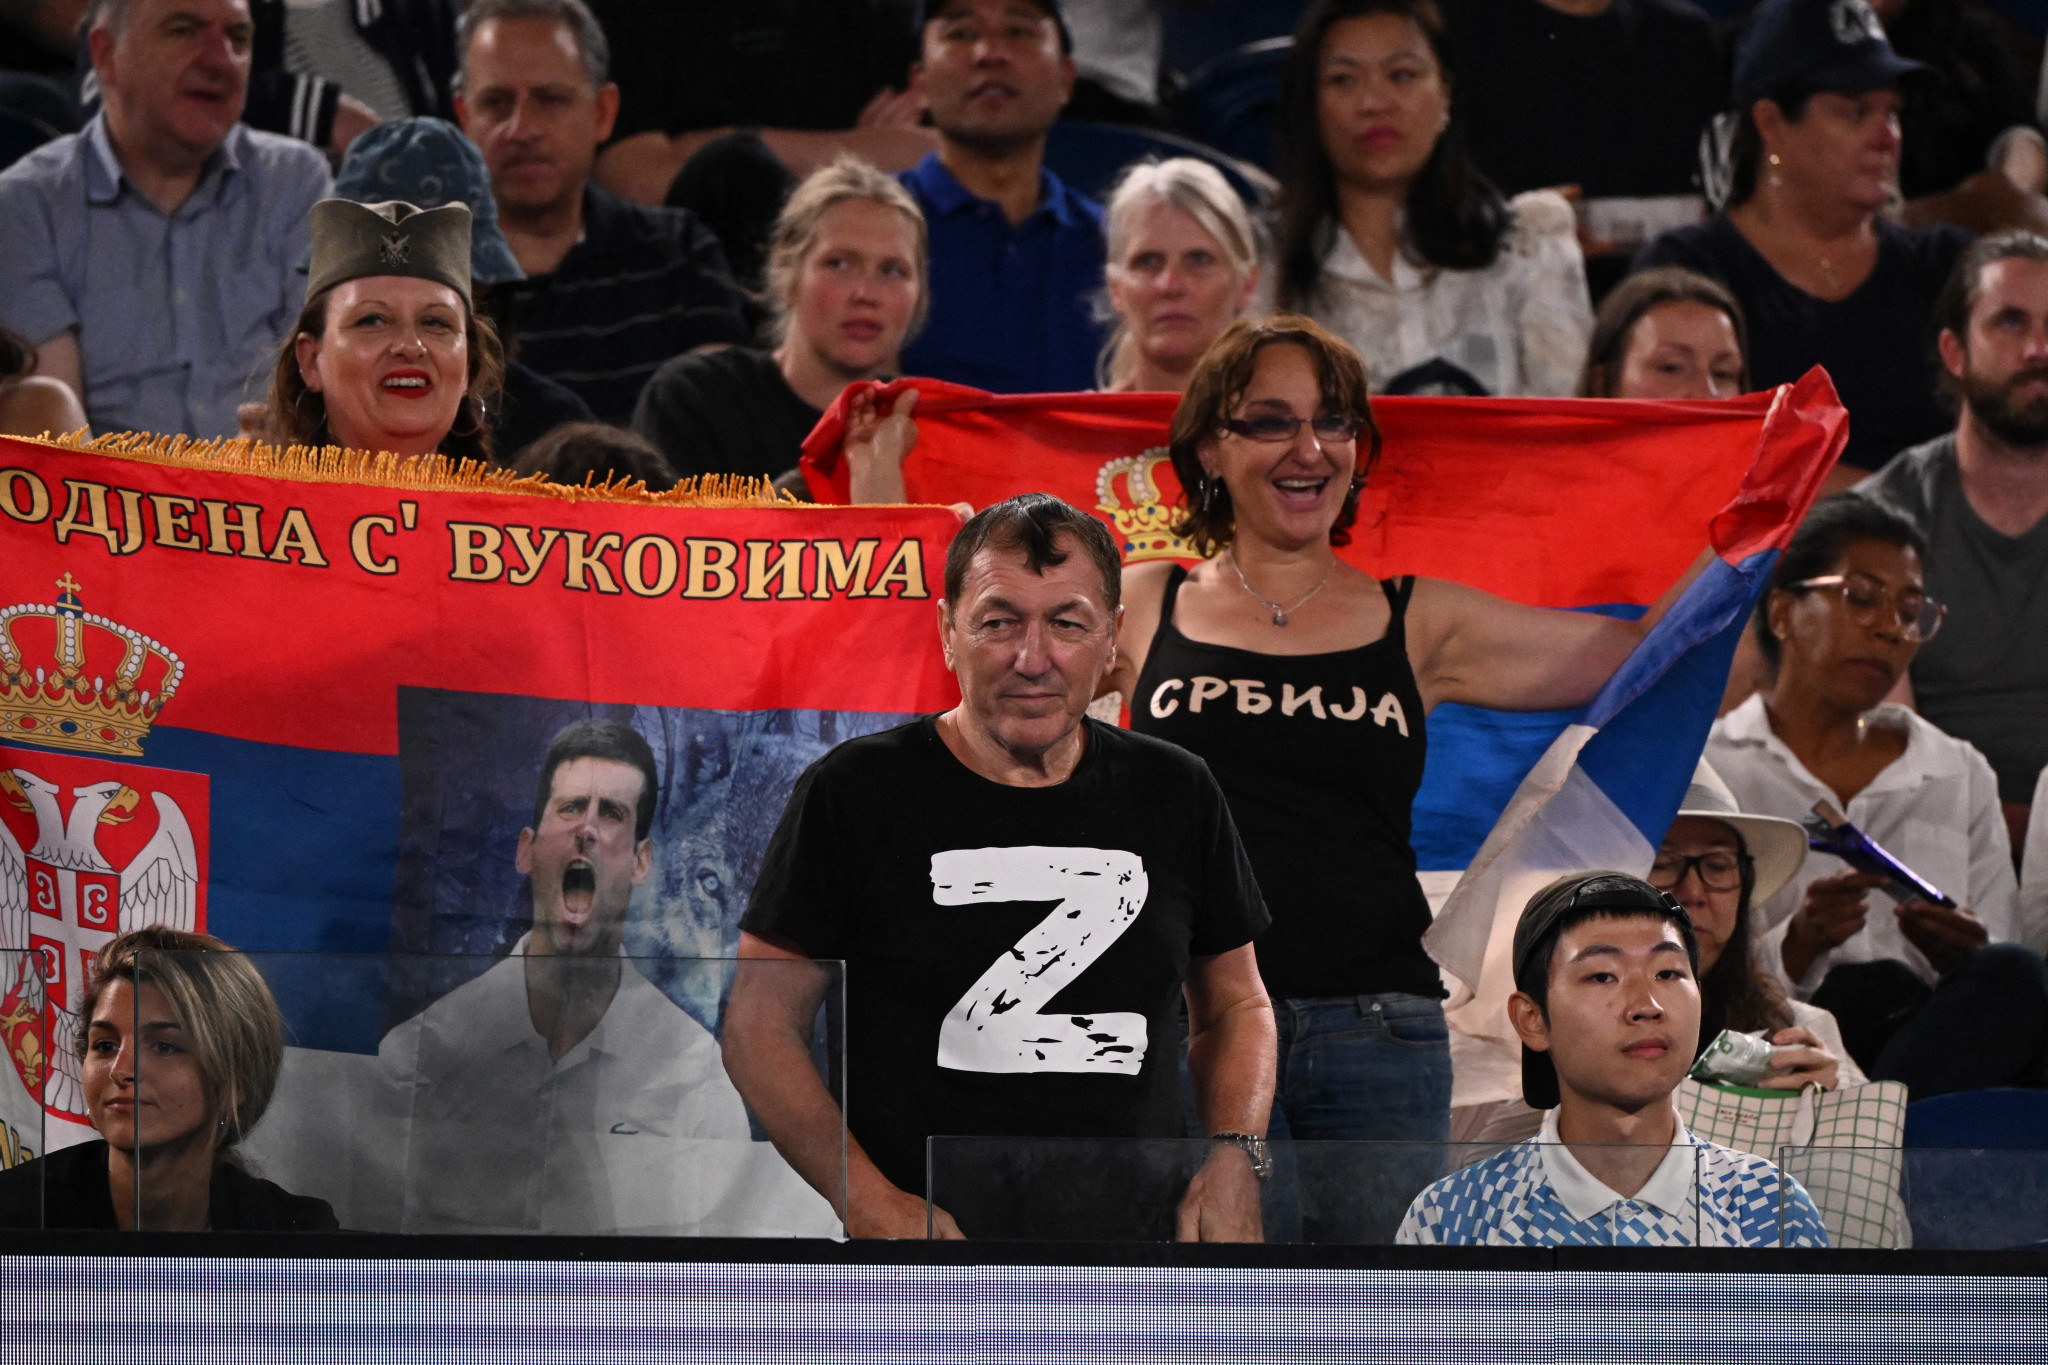 A tennis fan wore a Z symbol at this year's Australian Open which allowed Russian athletes to compete as neutrals ©Getty Images